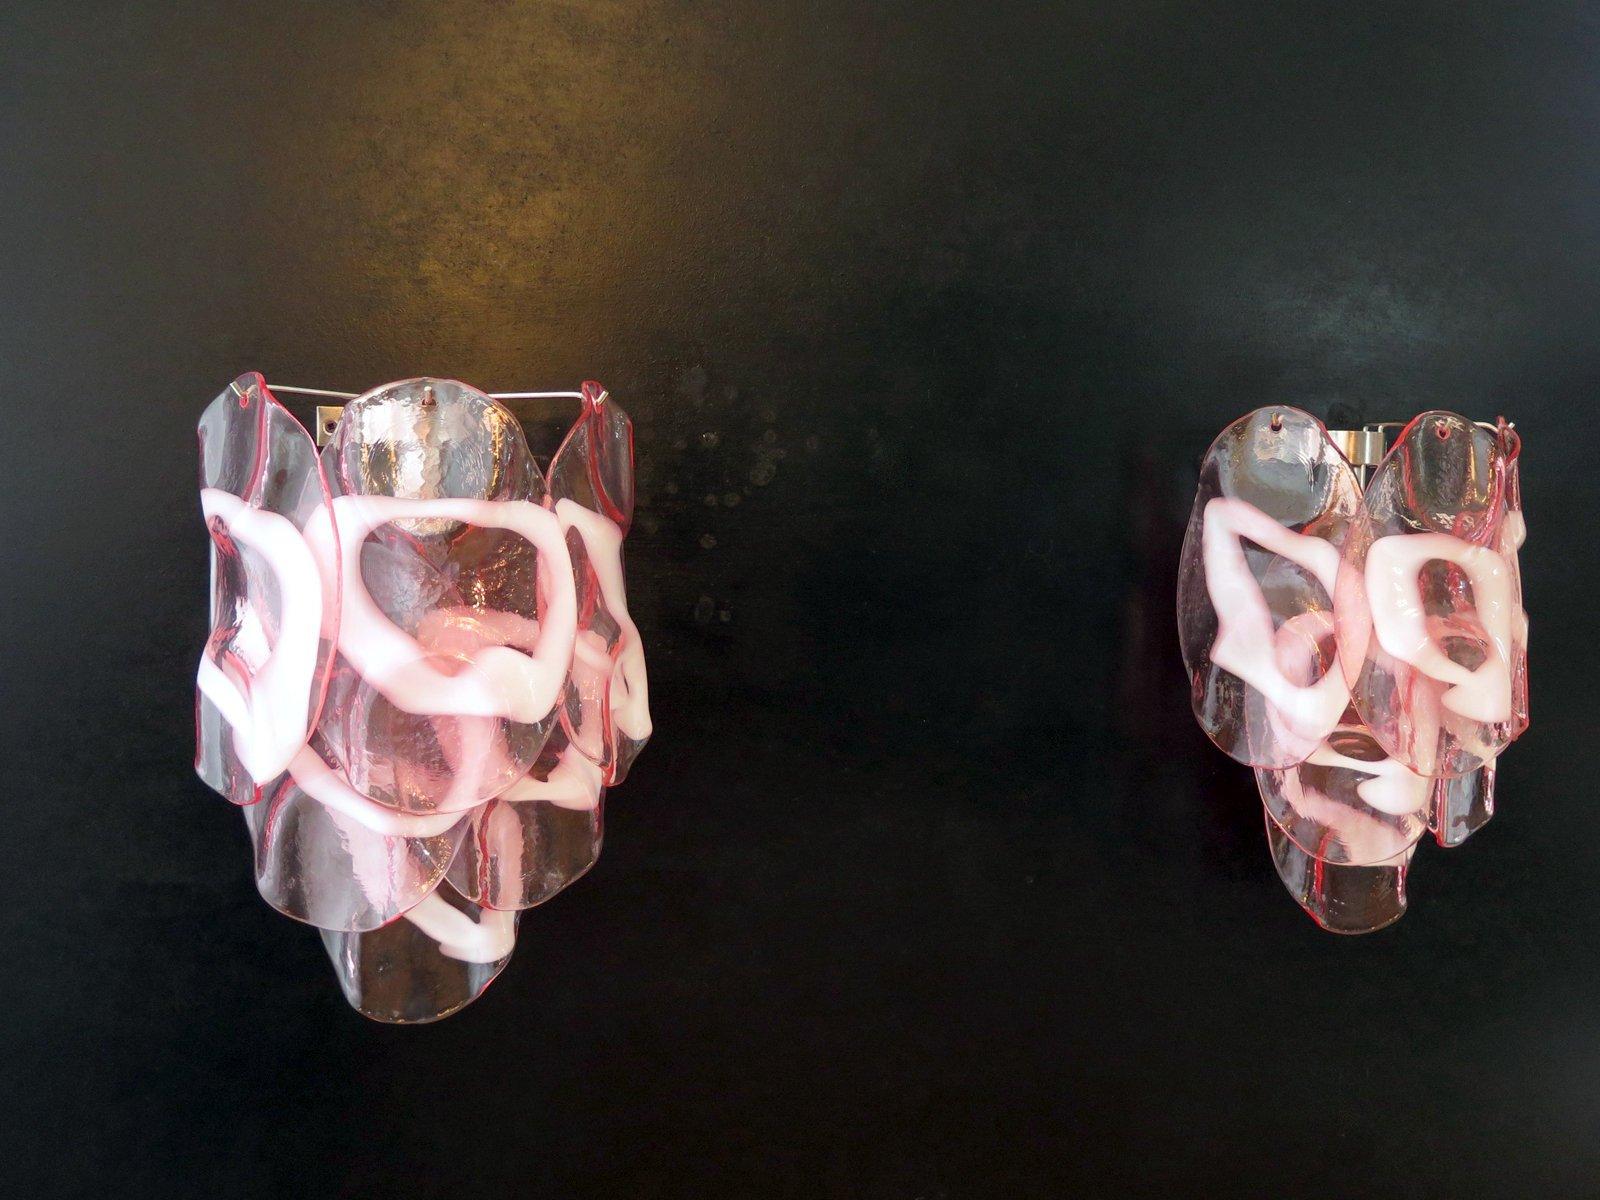 Pair of vintage Vistosi wall lights with pink and white Murano glass. Dimensions: H 36 x W 28 x D 15 cm.